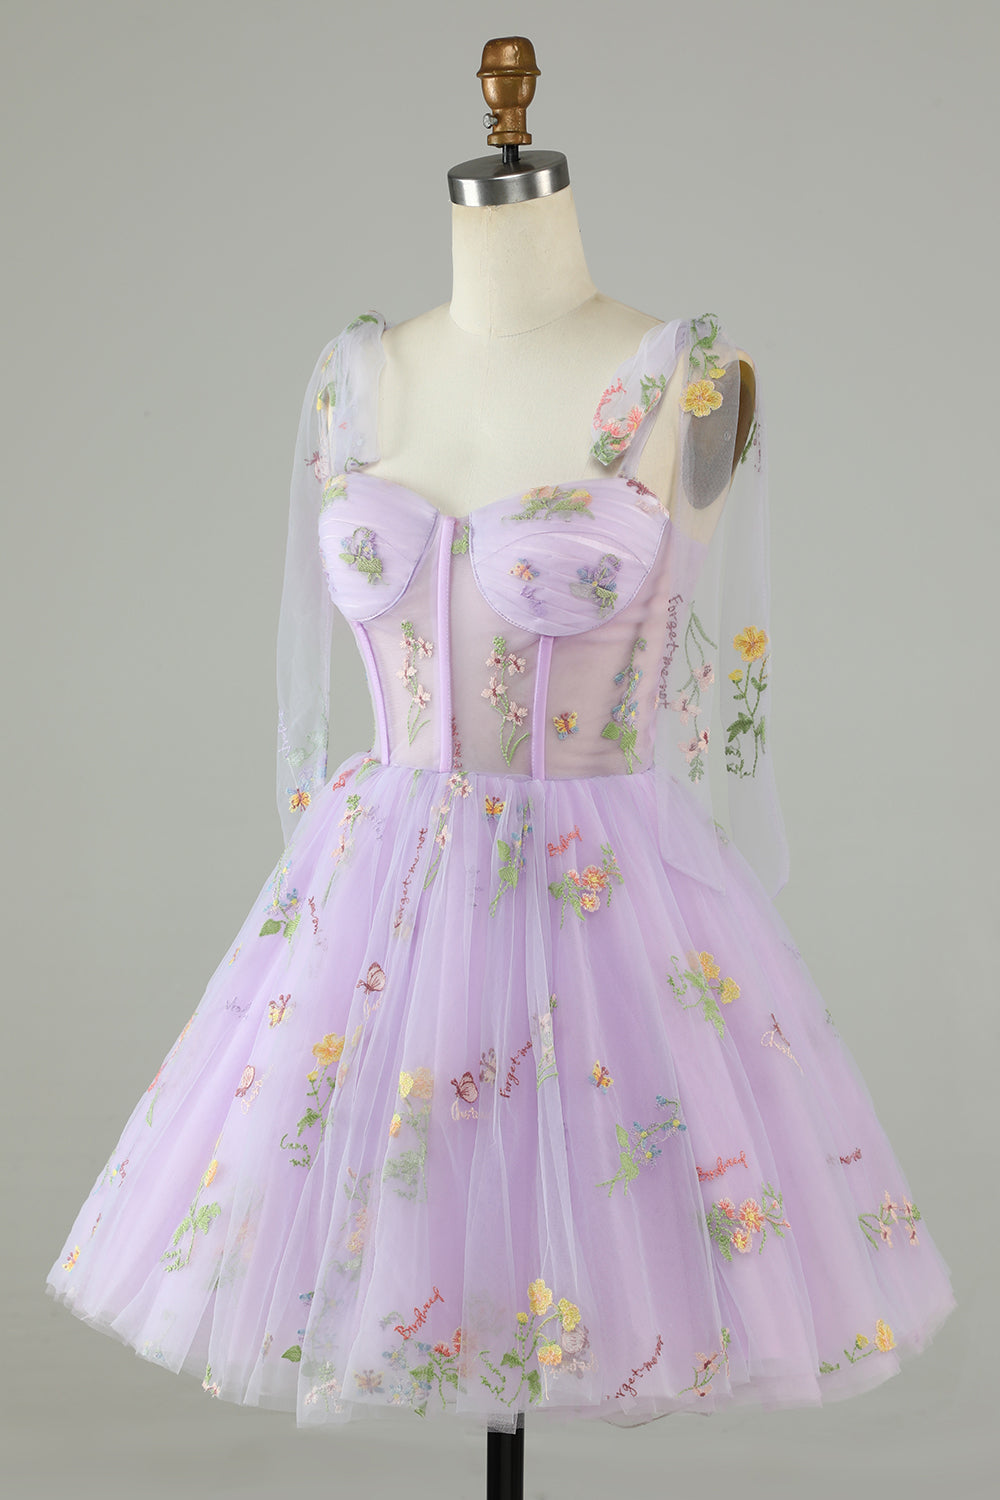 Lavender Tie Straps Short Party Dress With Embroidery